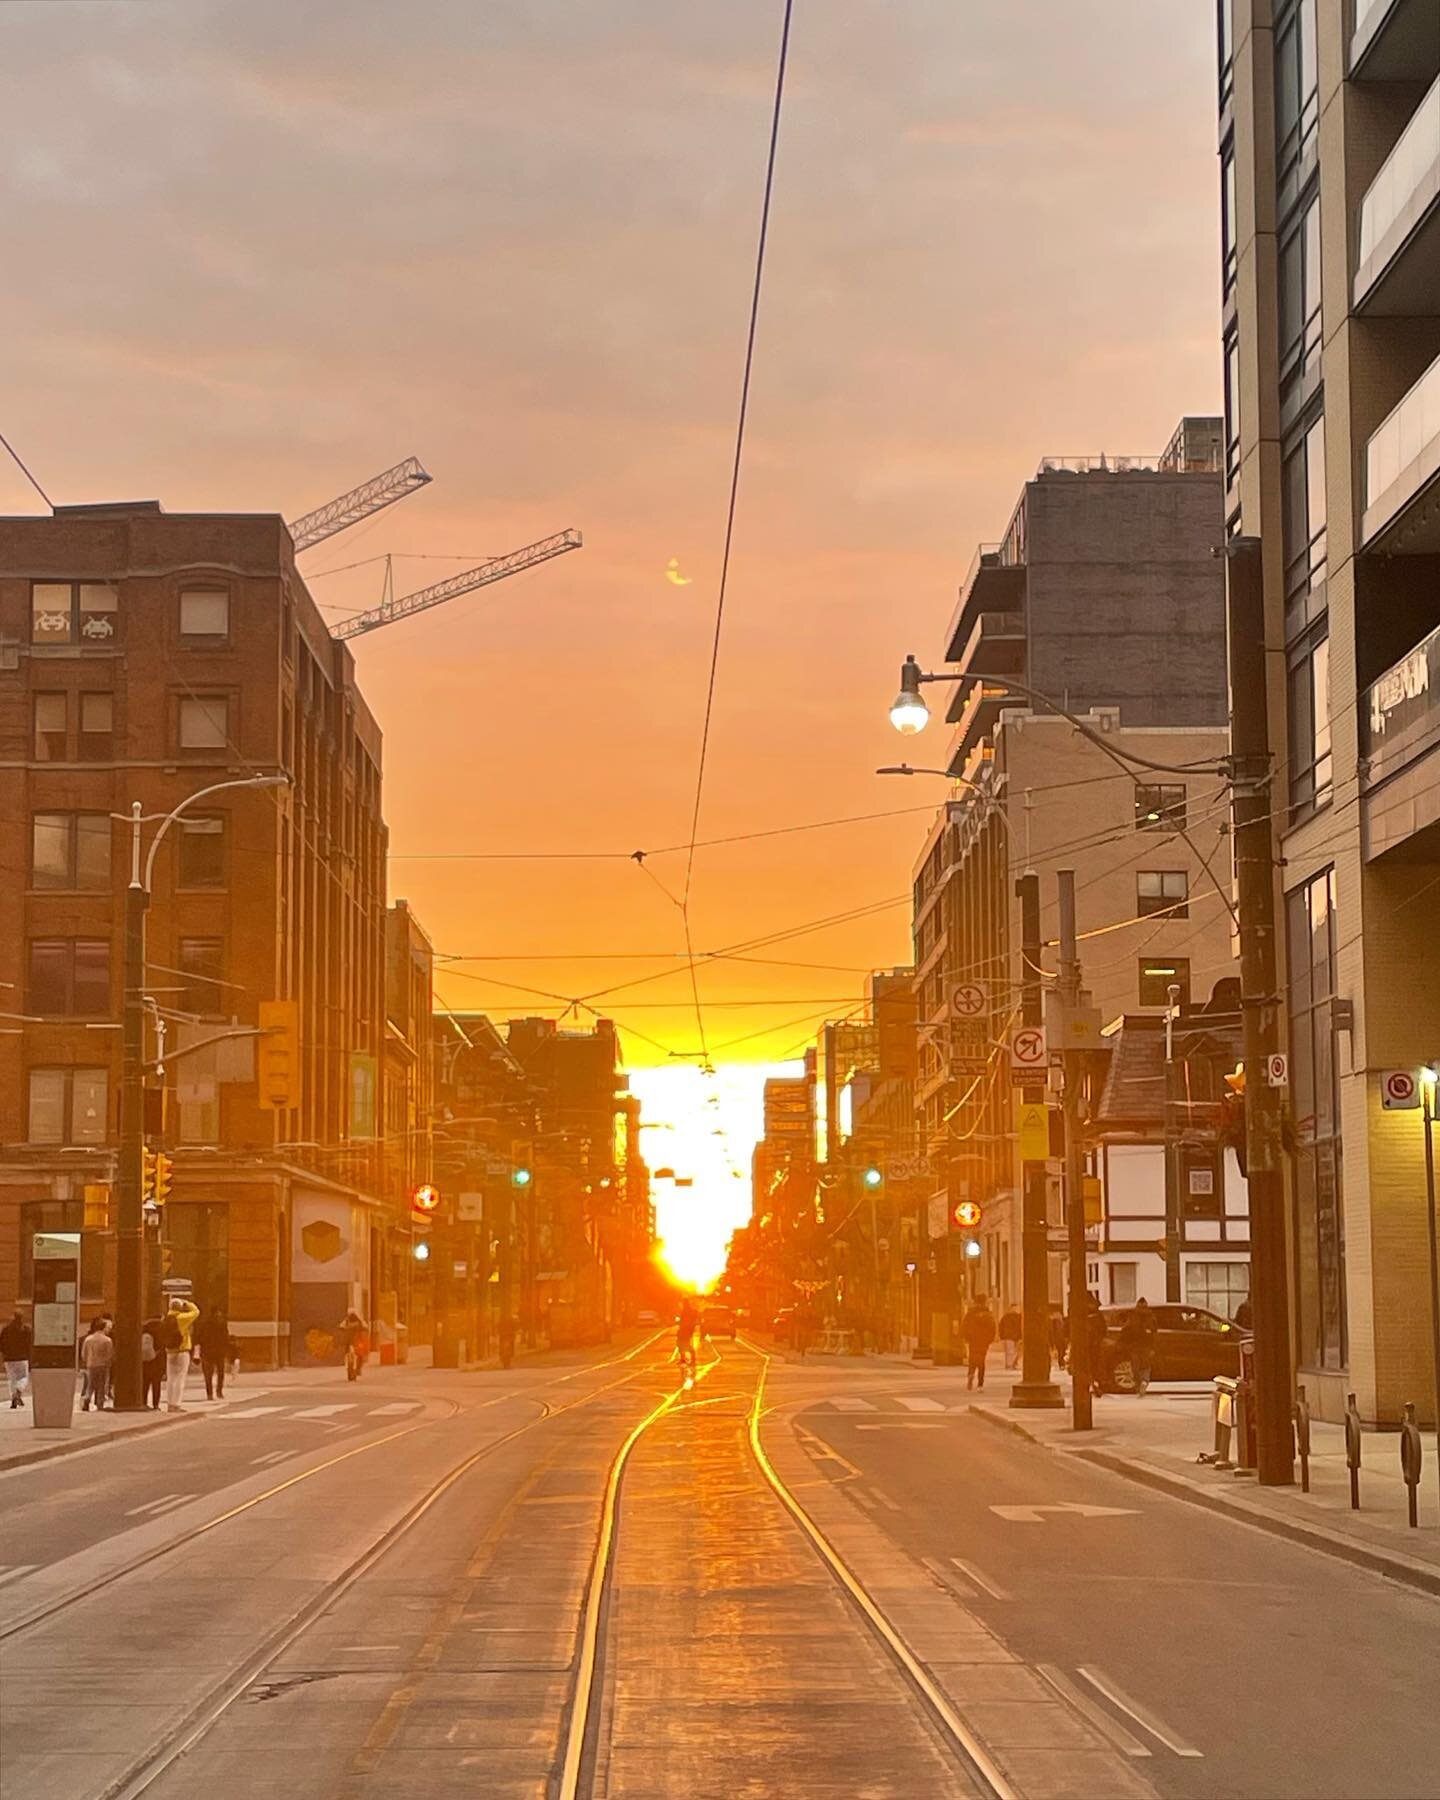 I almost got hit by a car, a bus, and a streetcar, but i think these shots of last week&rsquo;s #torontohenge are worth the risk. #toronto #sunset